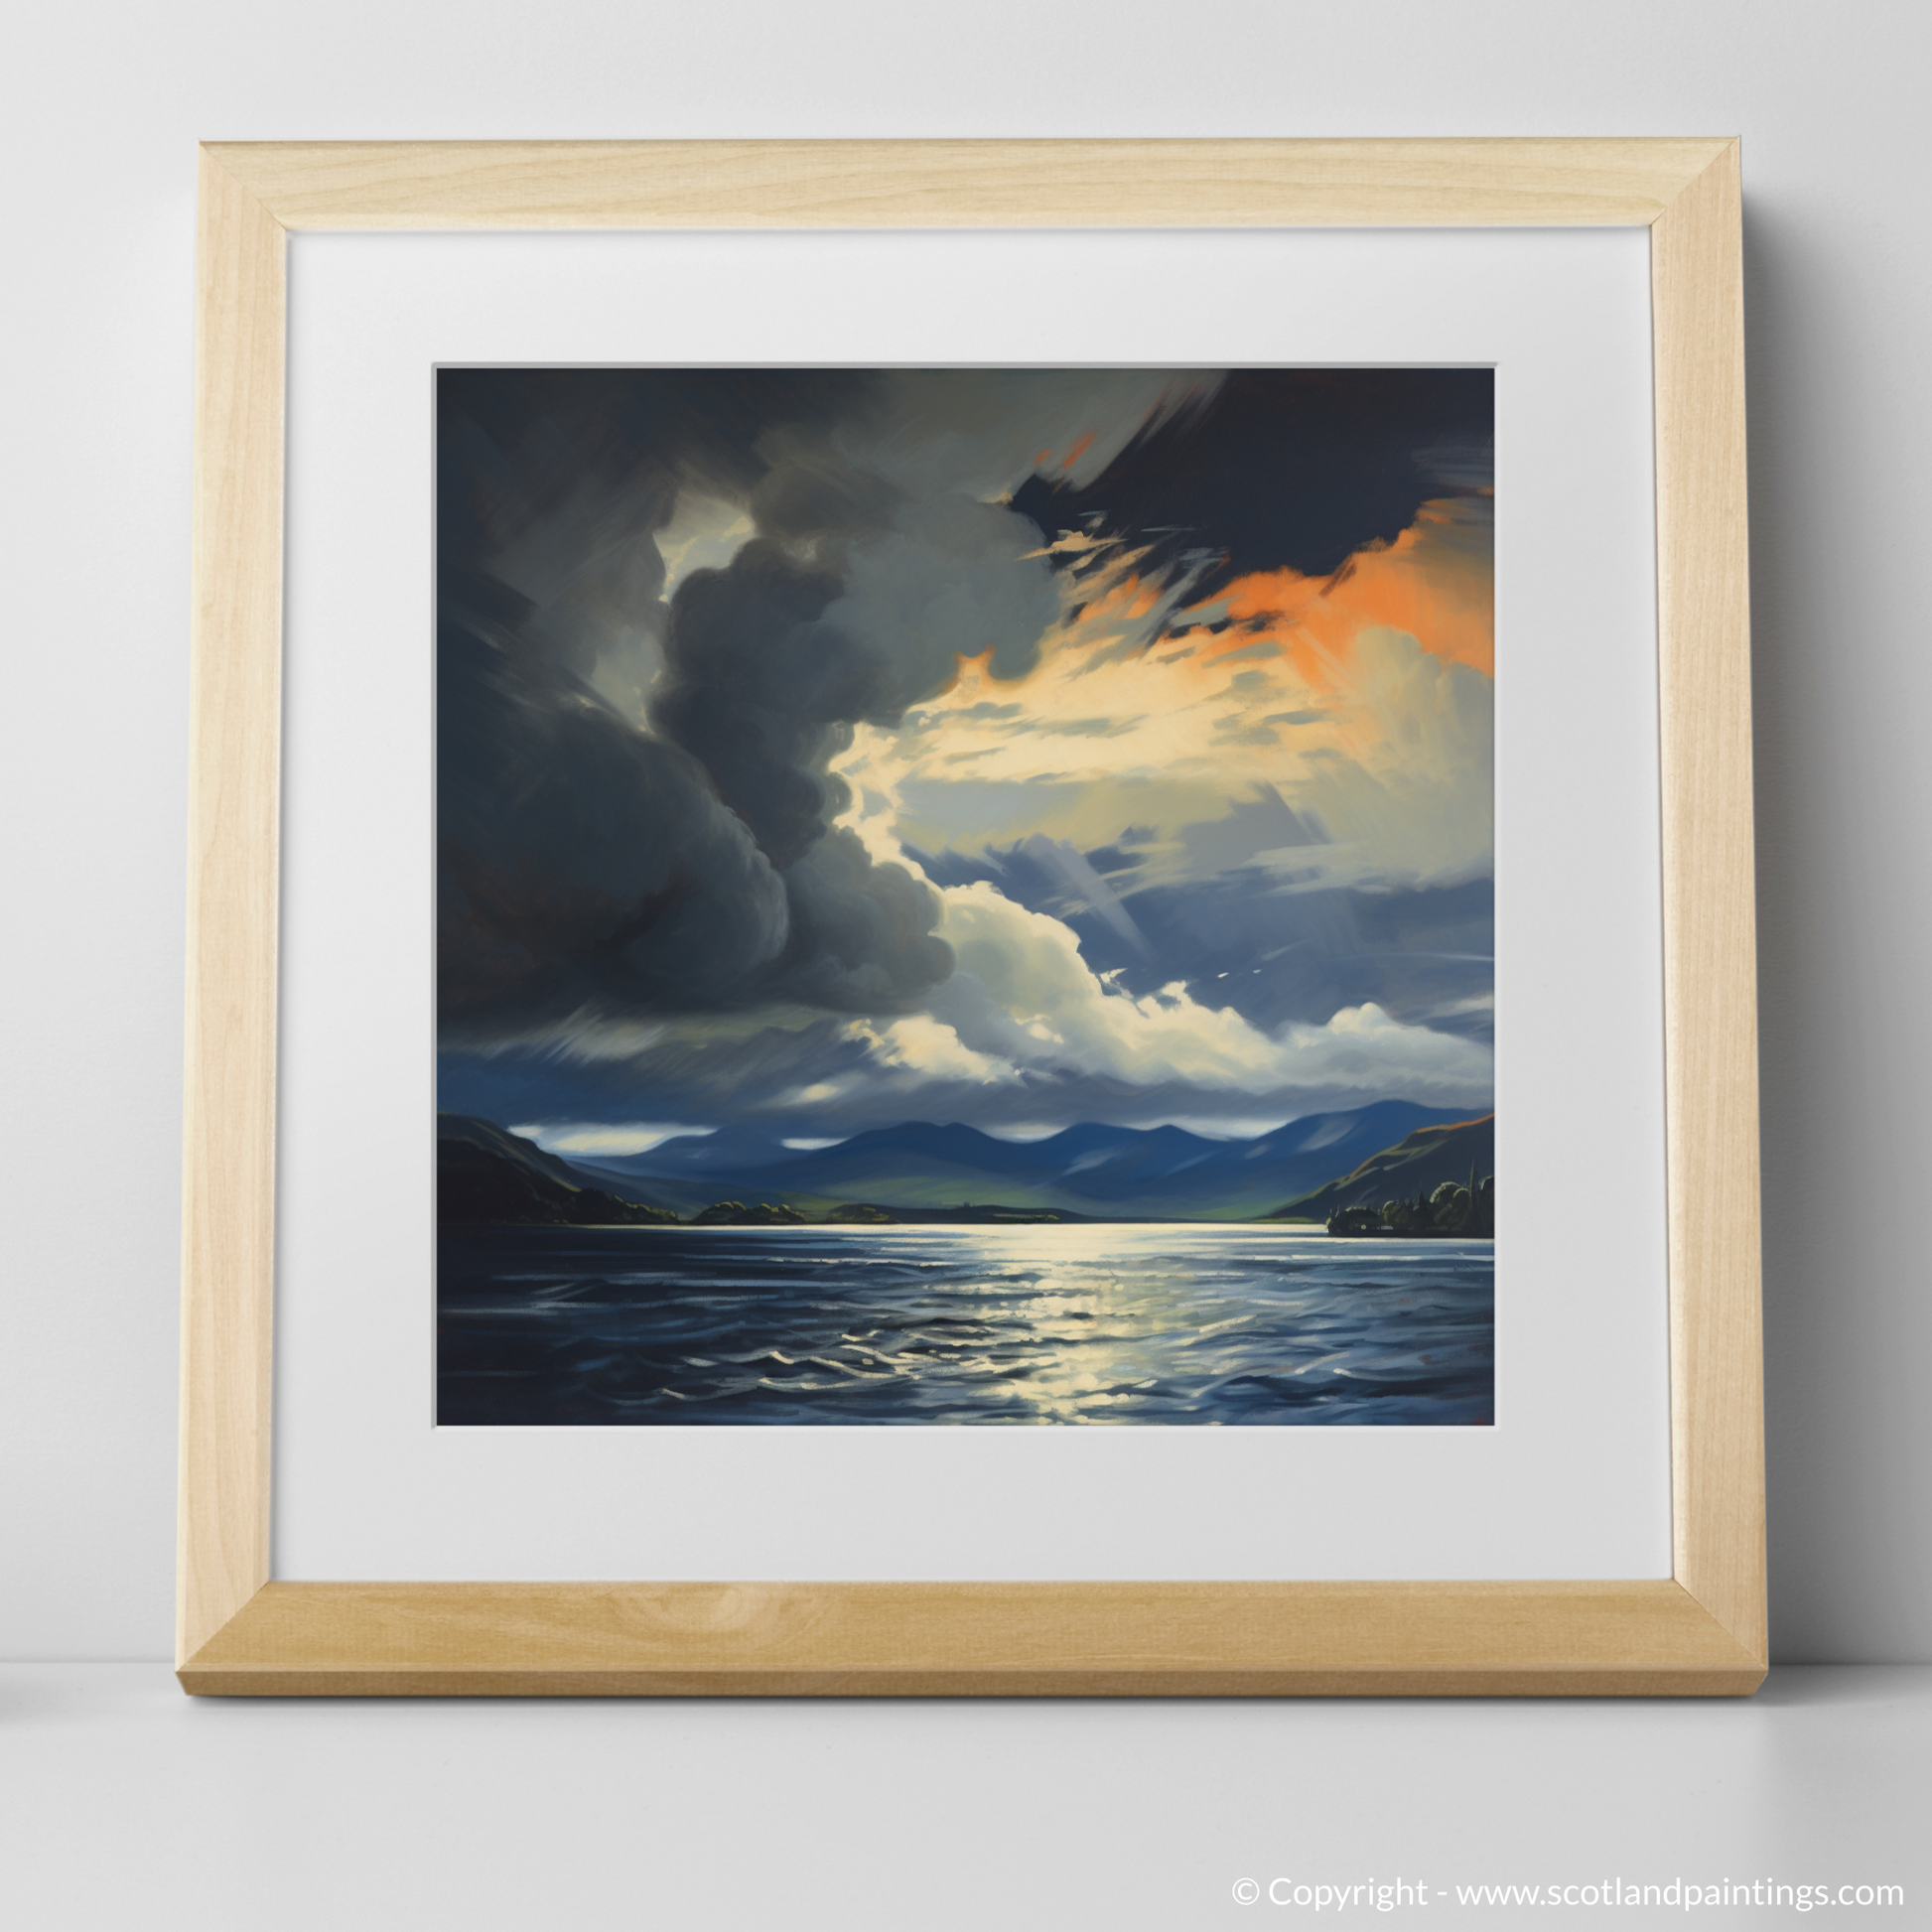 Art Print of Storm clouds above Loch Lomond with a natural frame